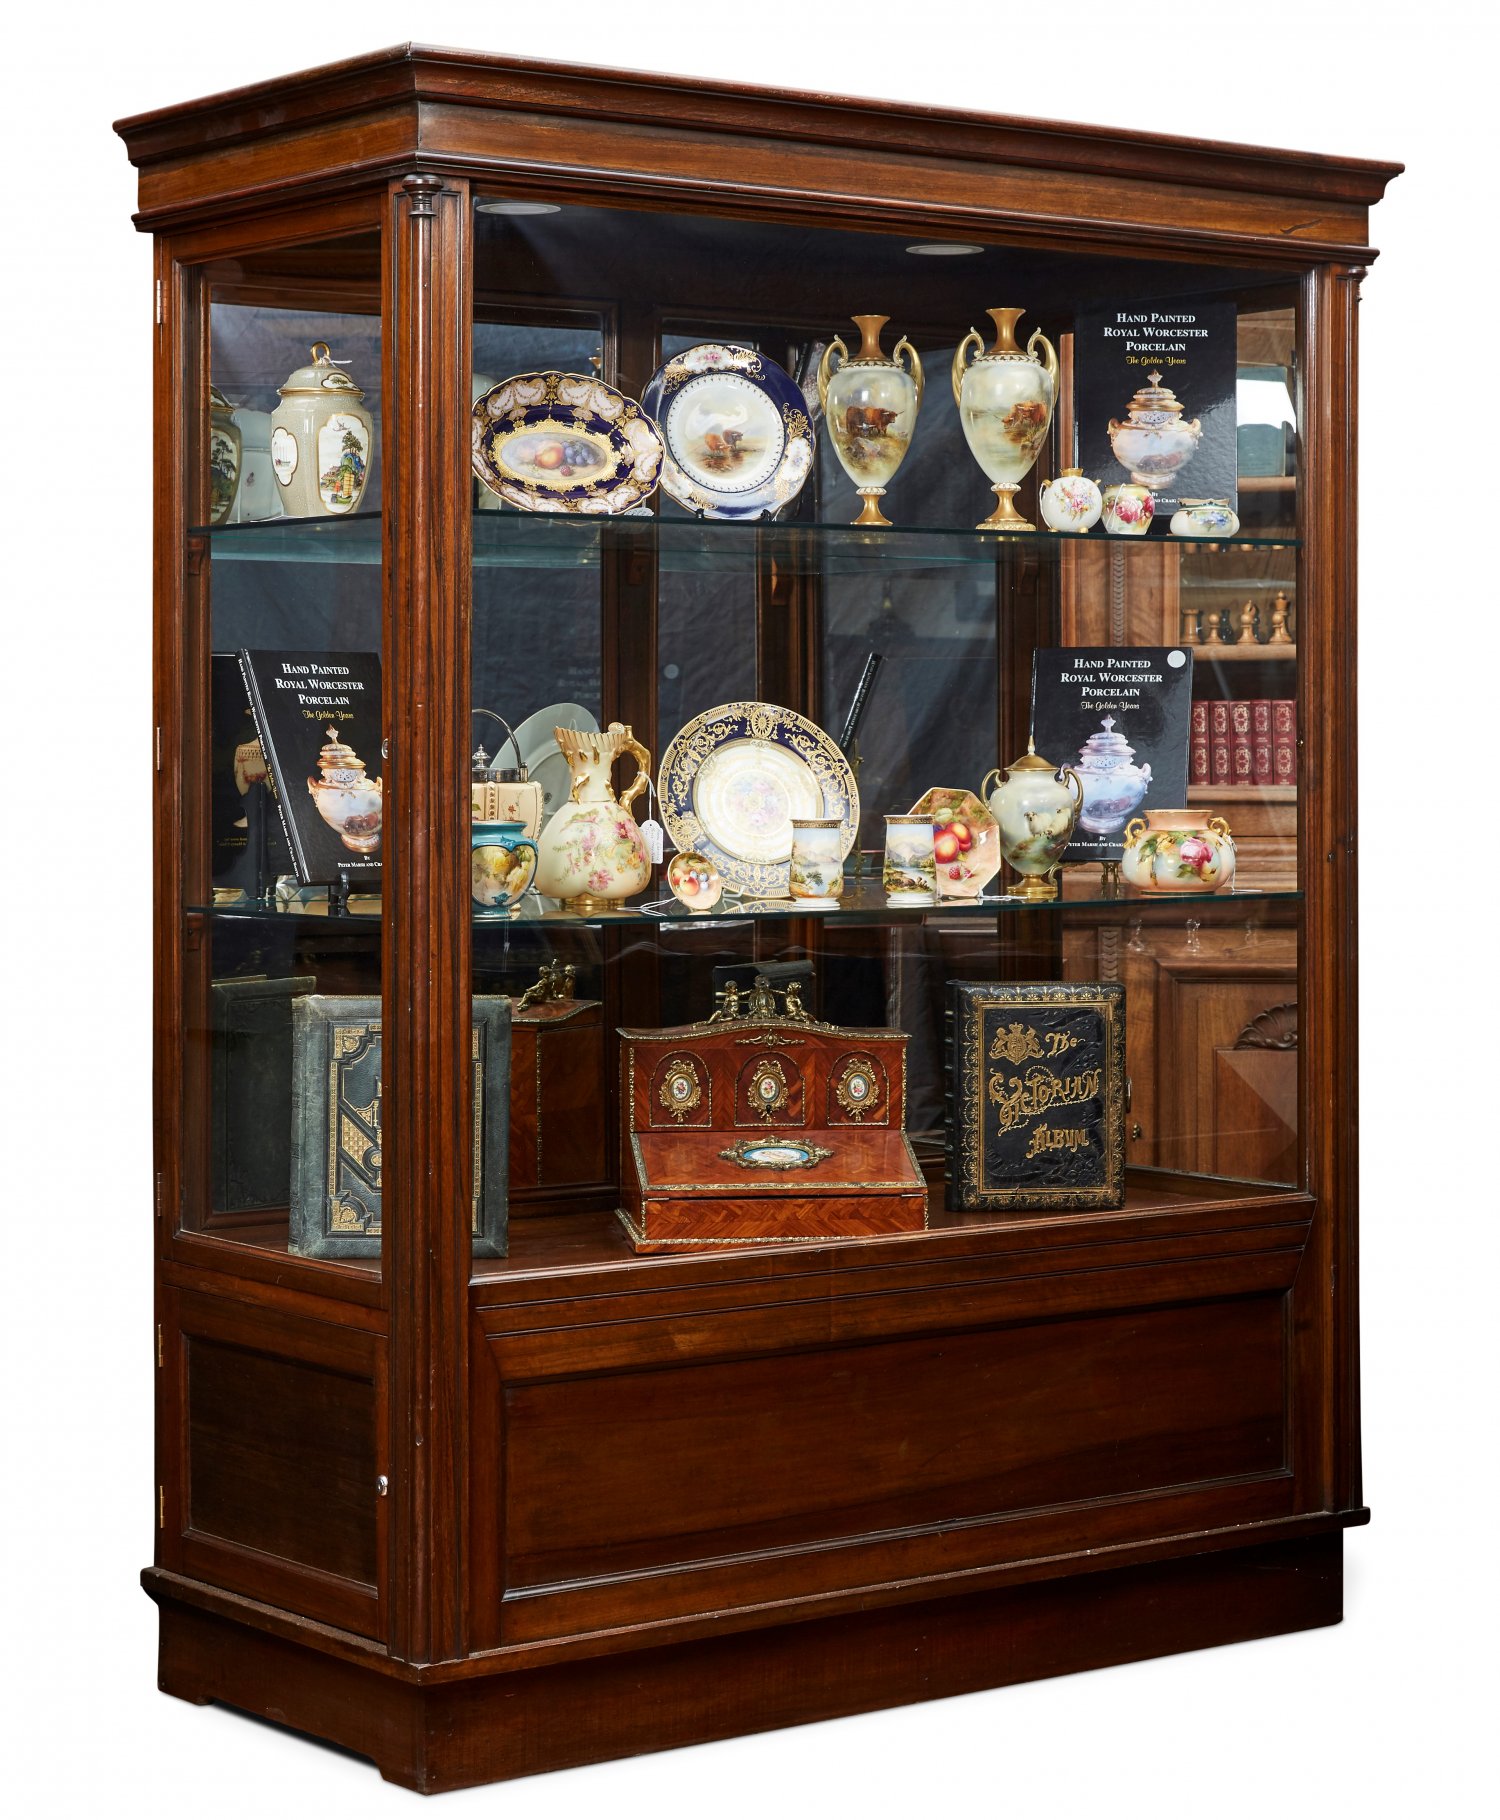 Edwardian Mahogany 4 Door Display Cabinet, with mirrored back, LED lighting inserted. c.1900